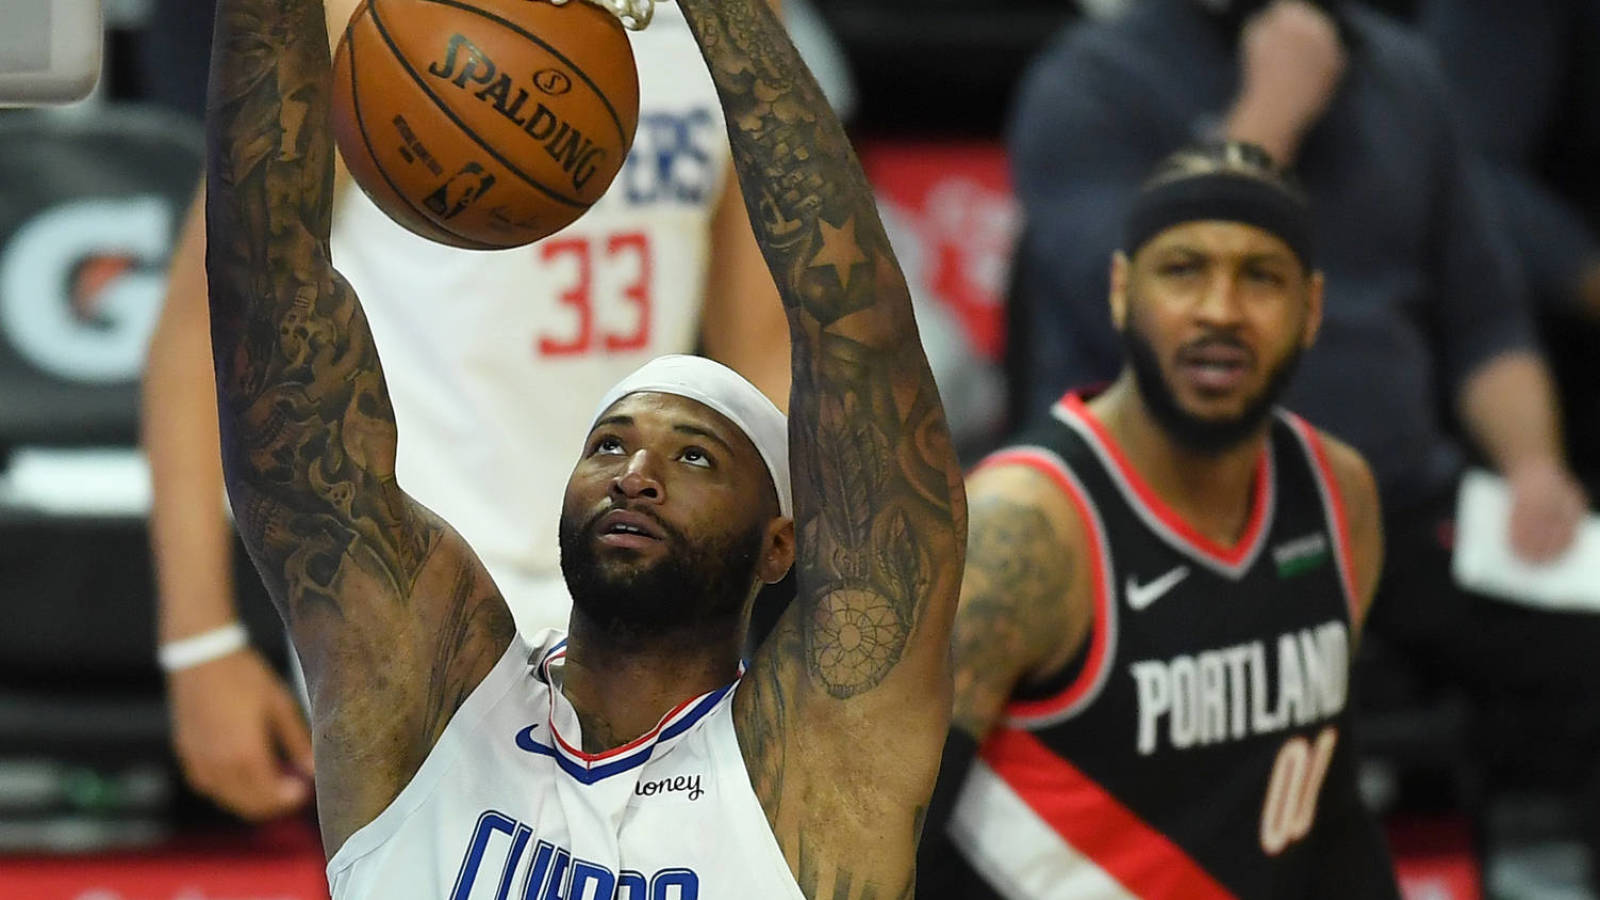 DeMarcus Cousins after Clippers' debut: 'Best shape I've been in my entire career'